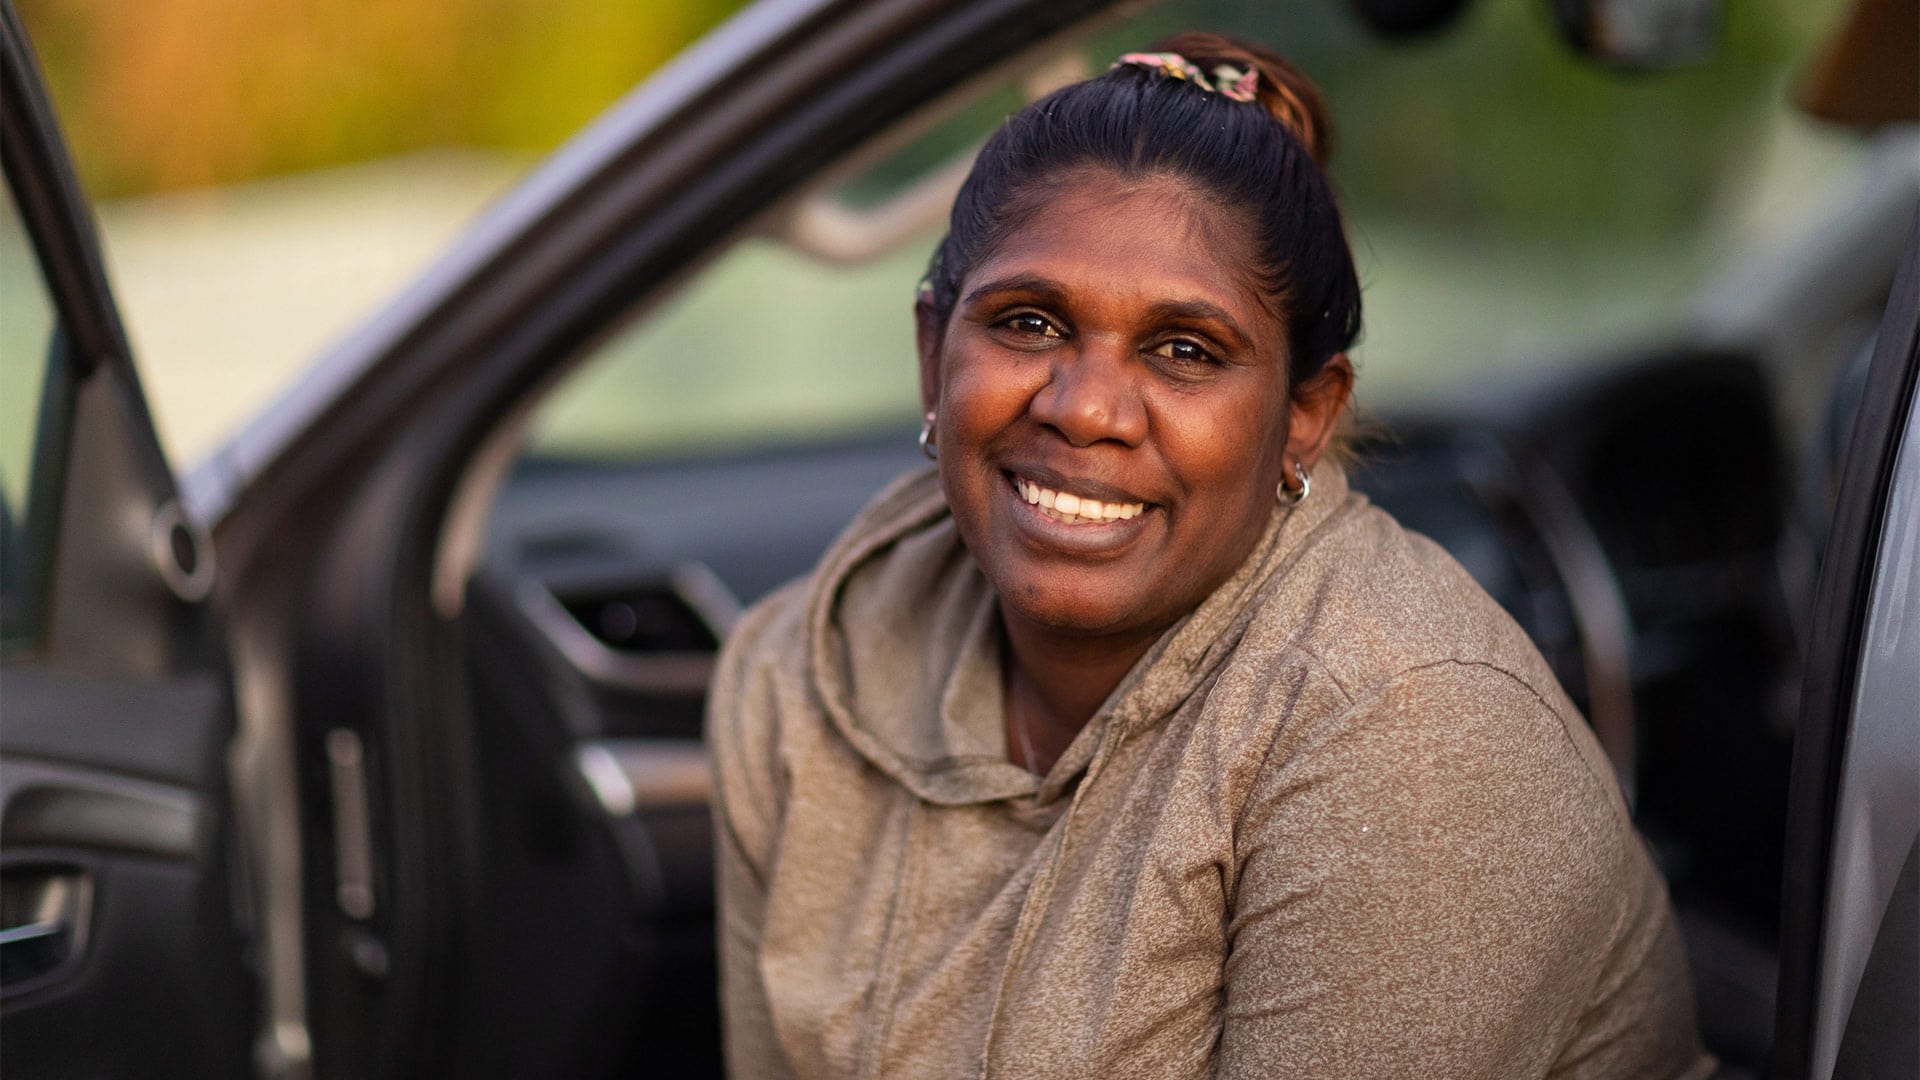 A woman sits in the front seat of a car smiling at the camera.